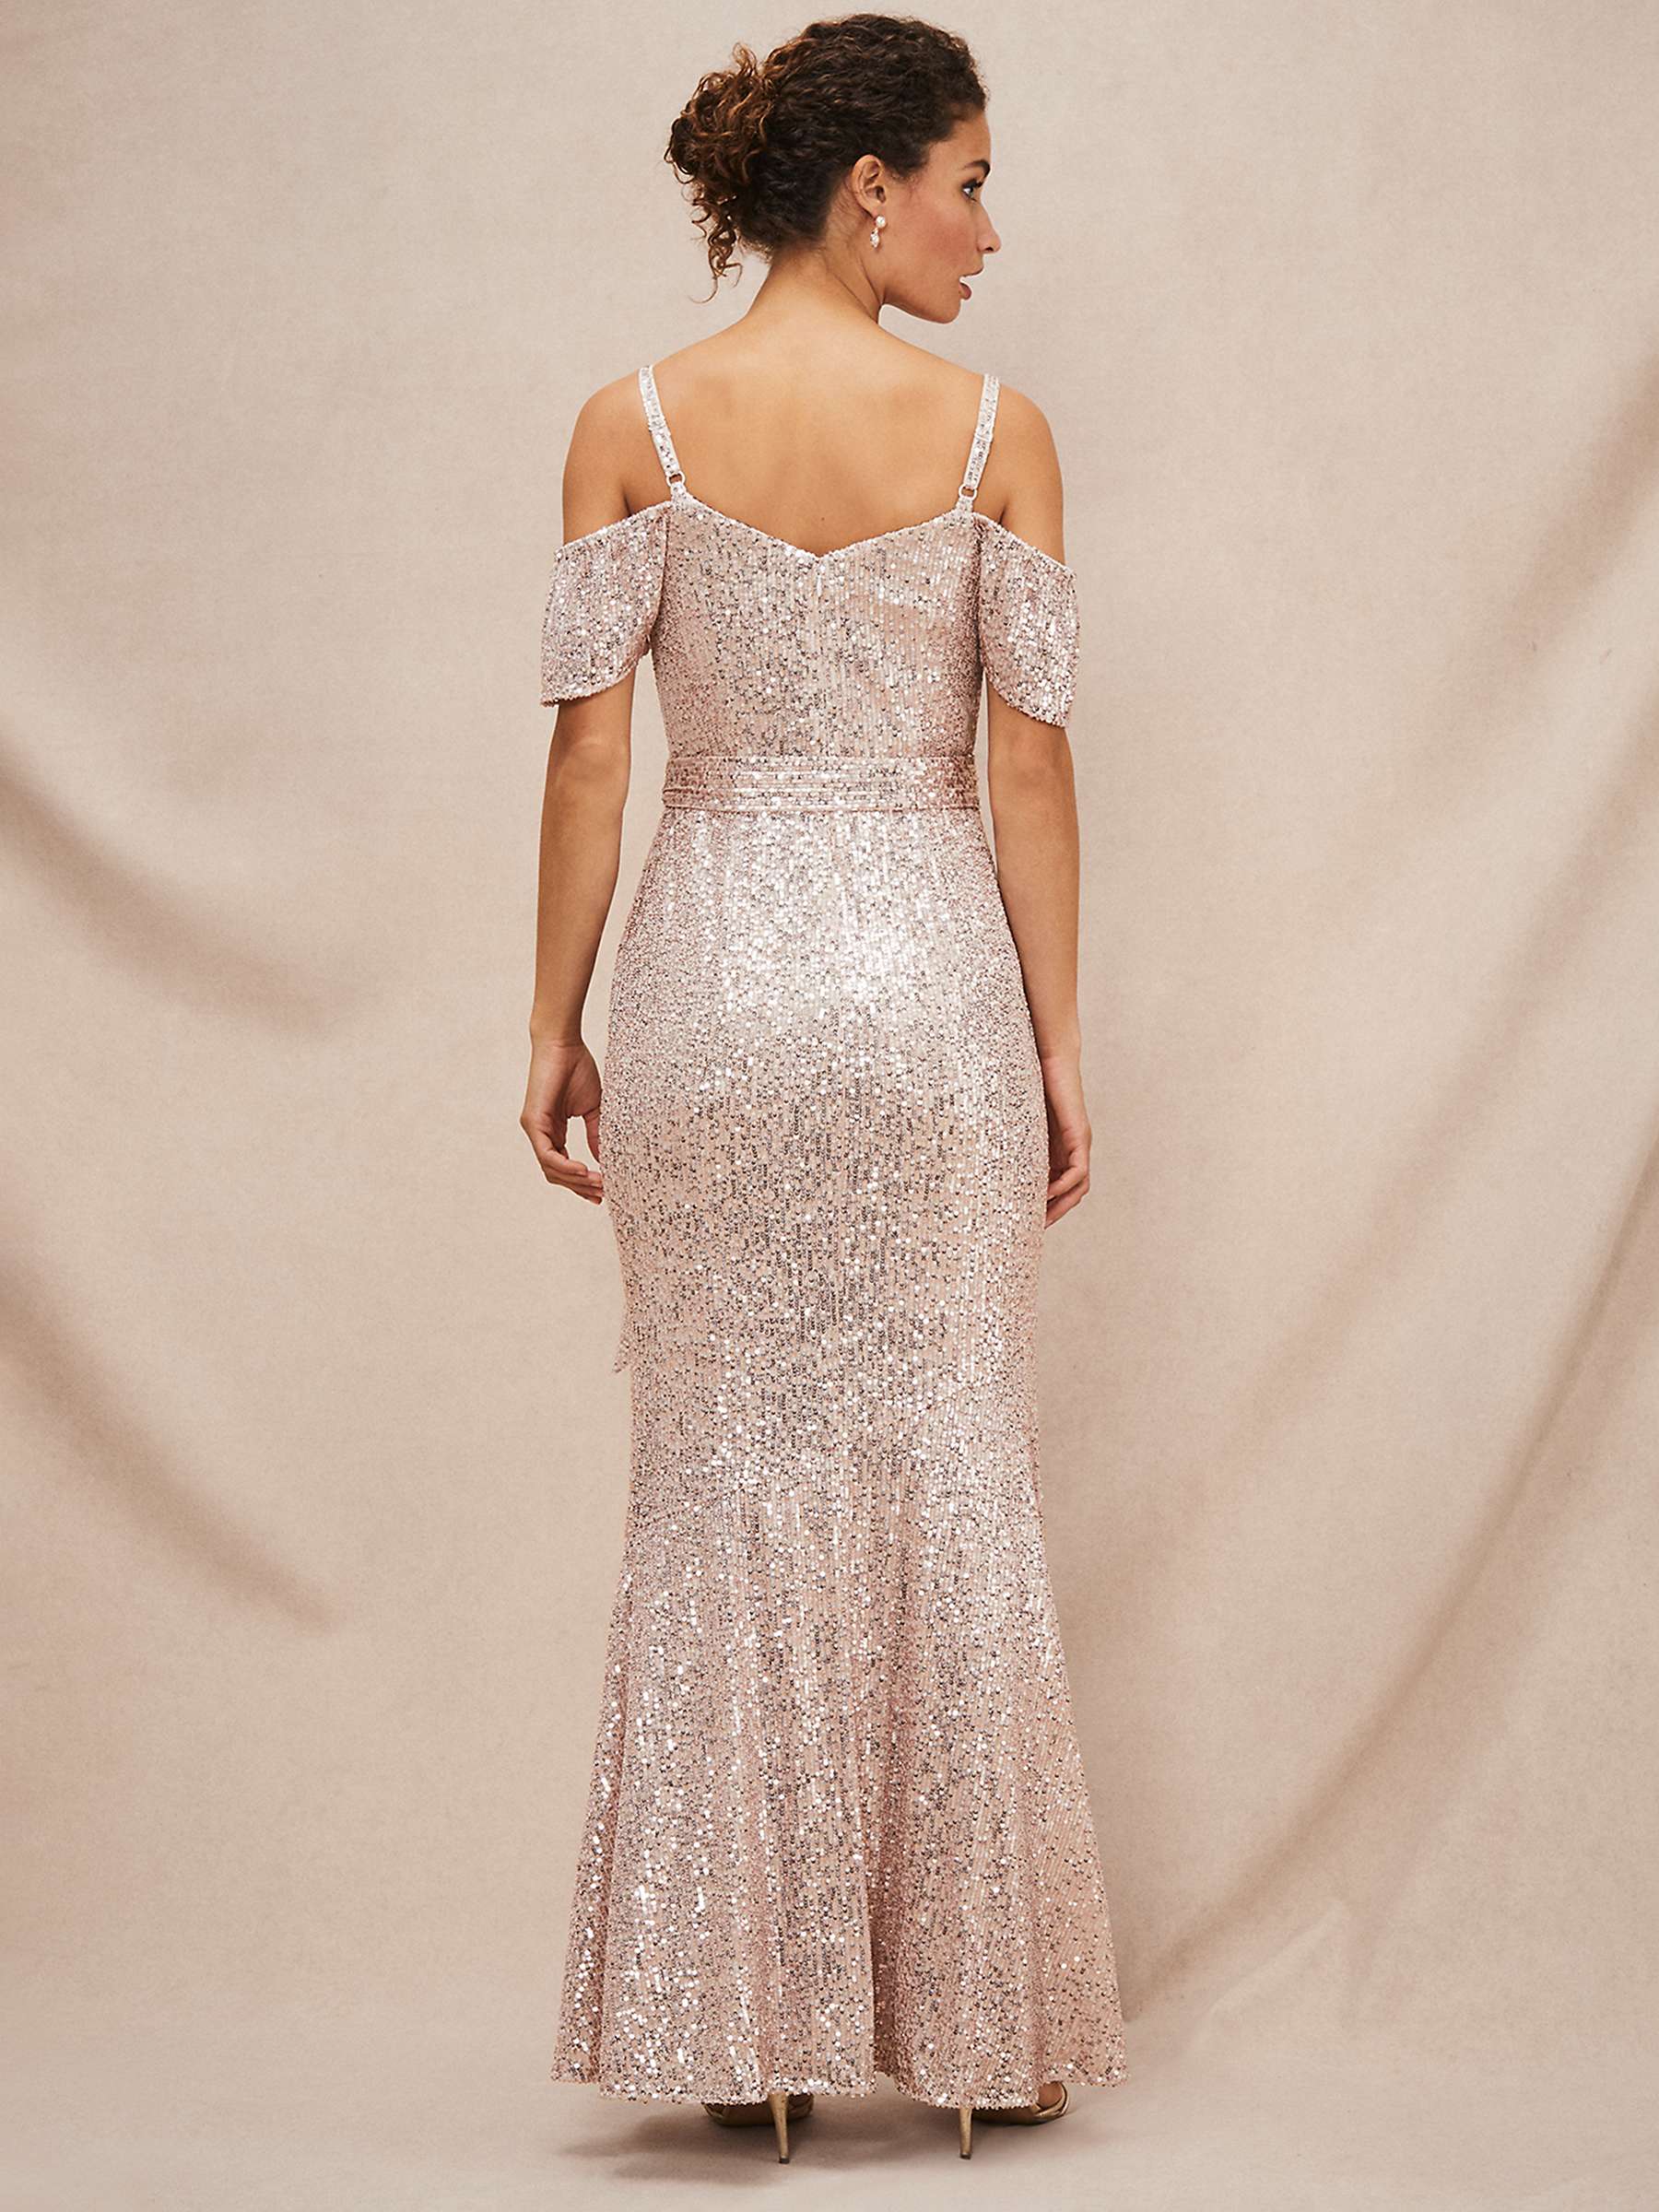 Buy Phase Eight  Poppy Off the Shoulder Sequin Dress, Rose Gold Online at johnlewis.com